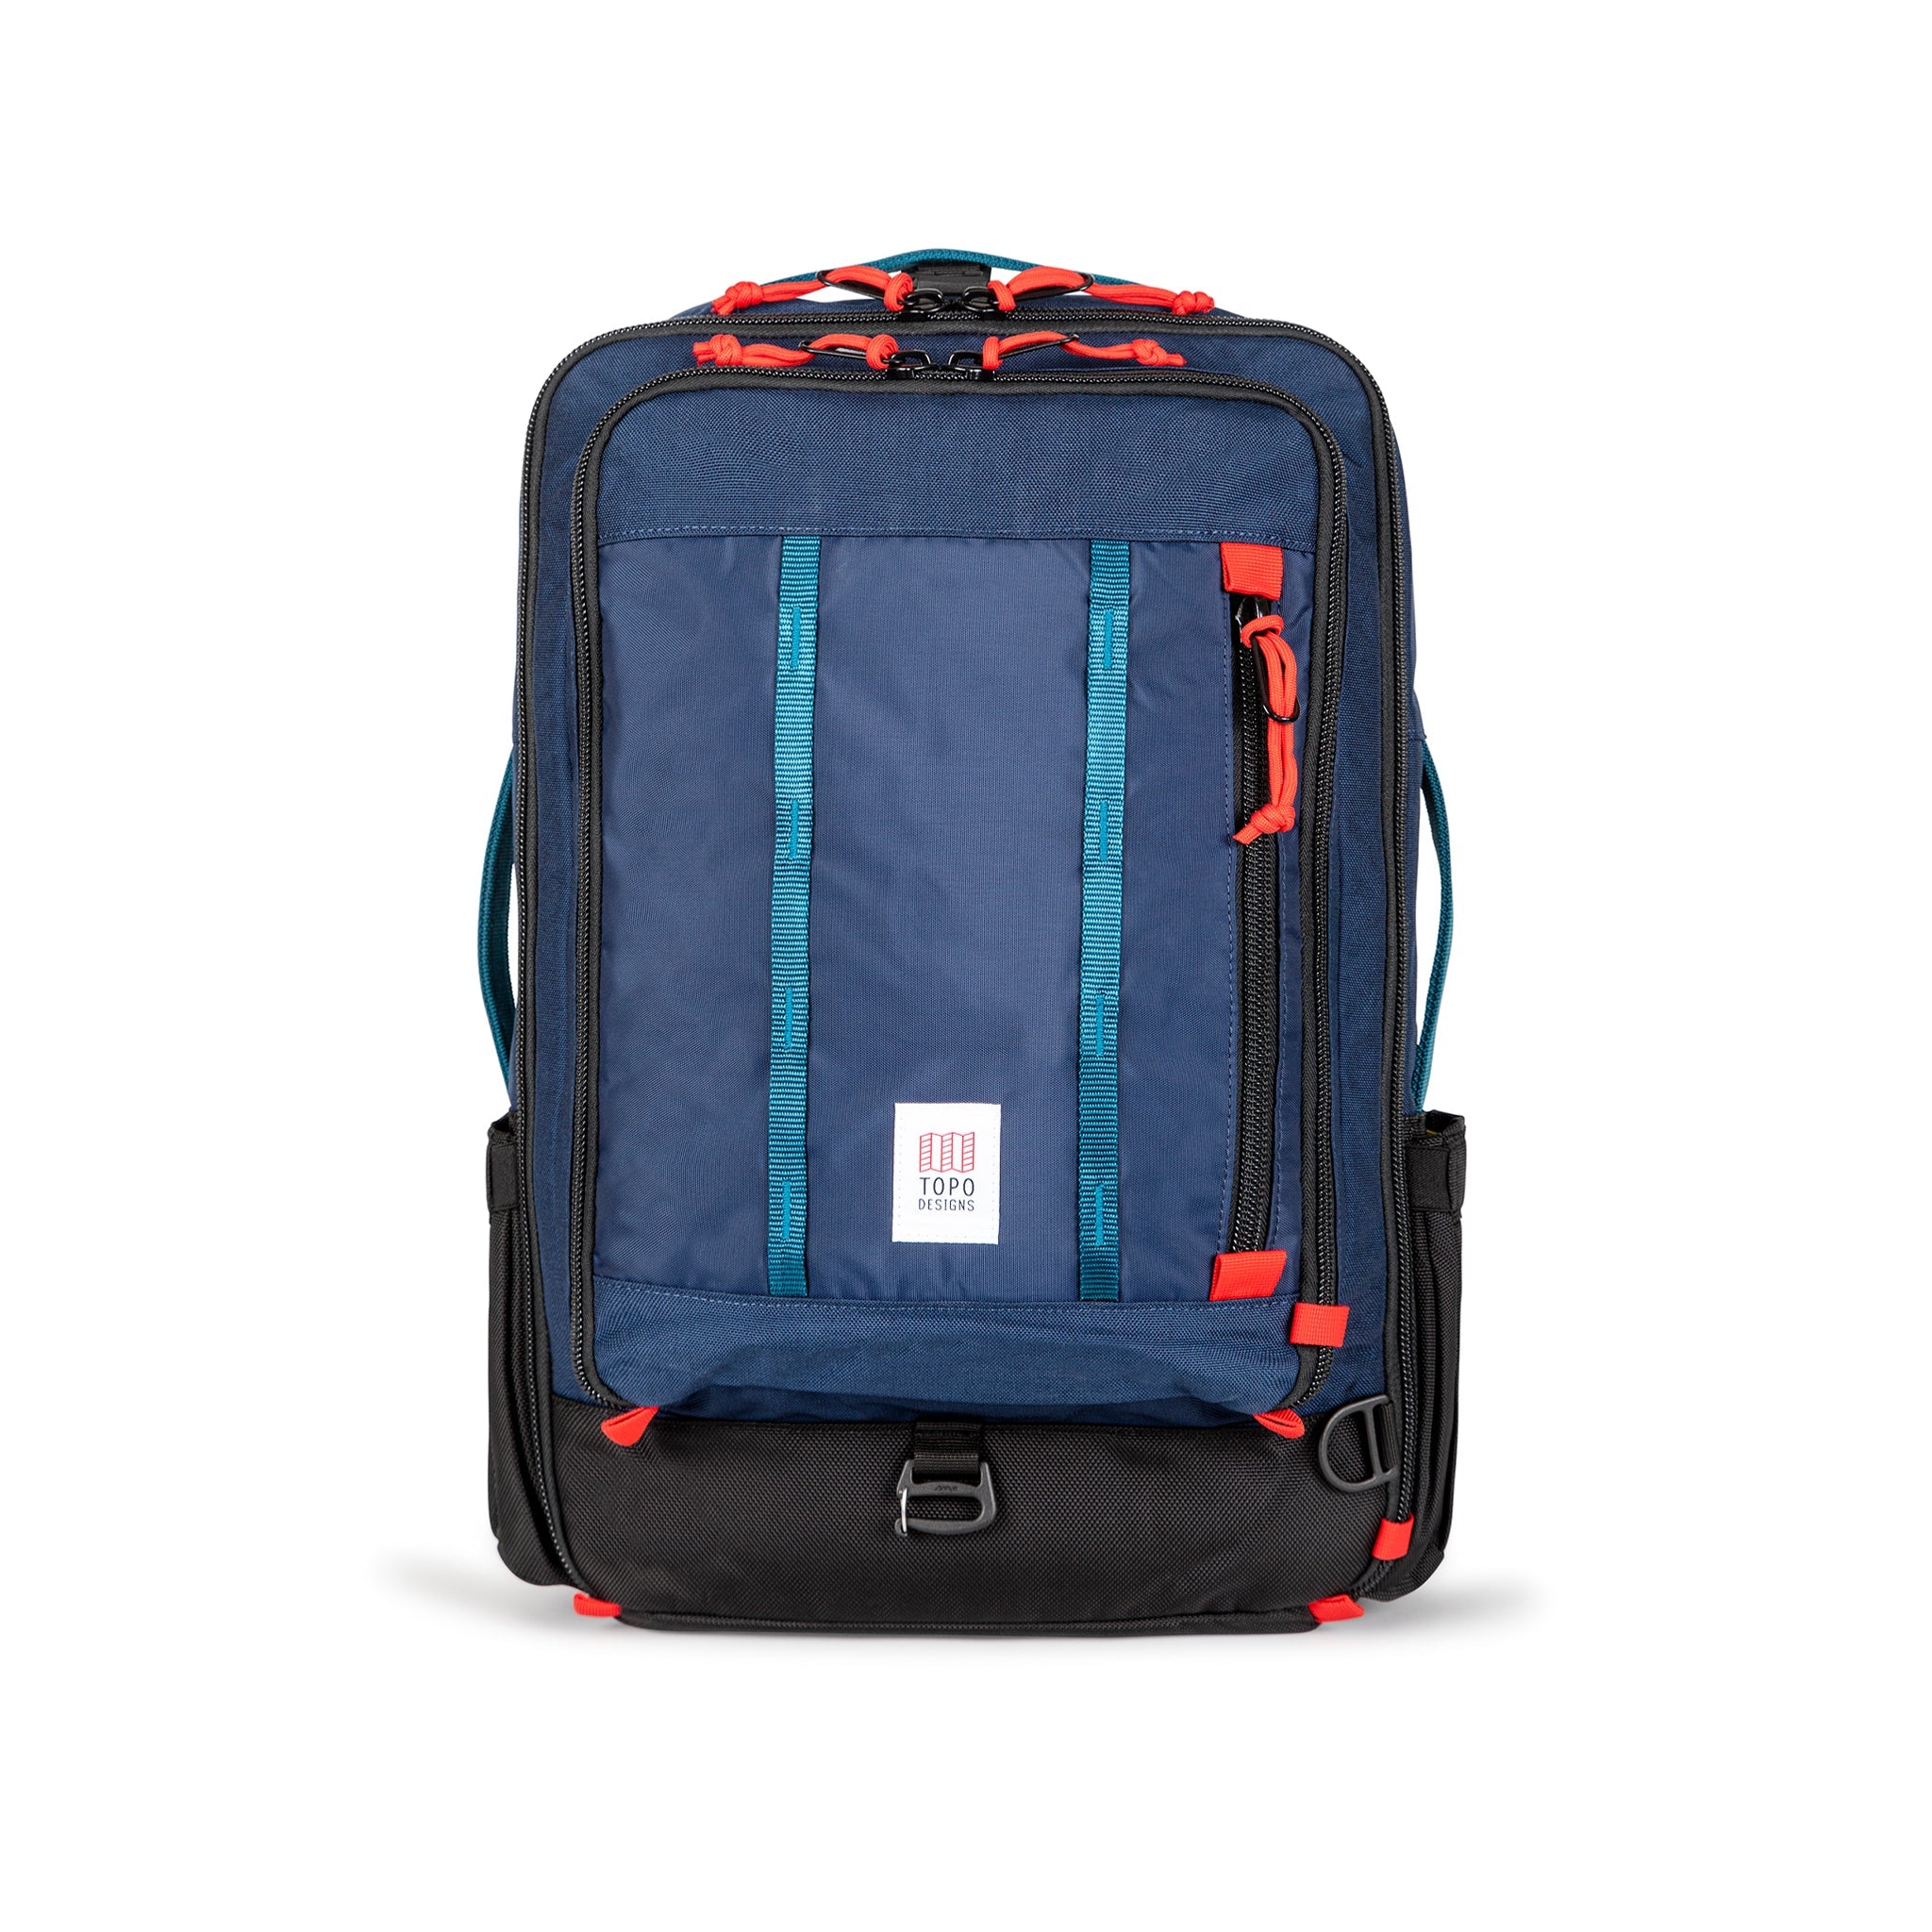 Topo Designs Global Travel Bag 30L Durable Carry On Convertible Laptop Travel Backpack in "Navy" blue.